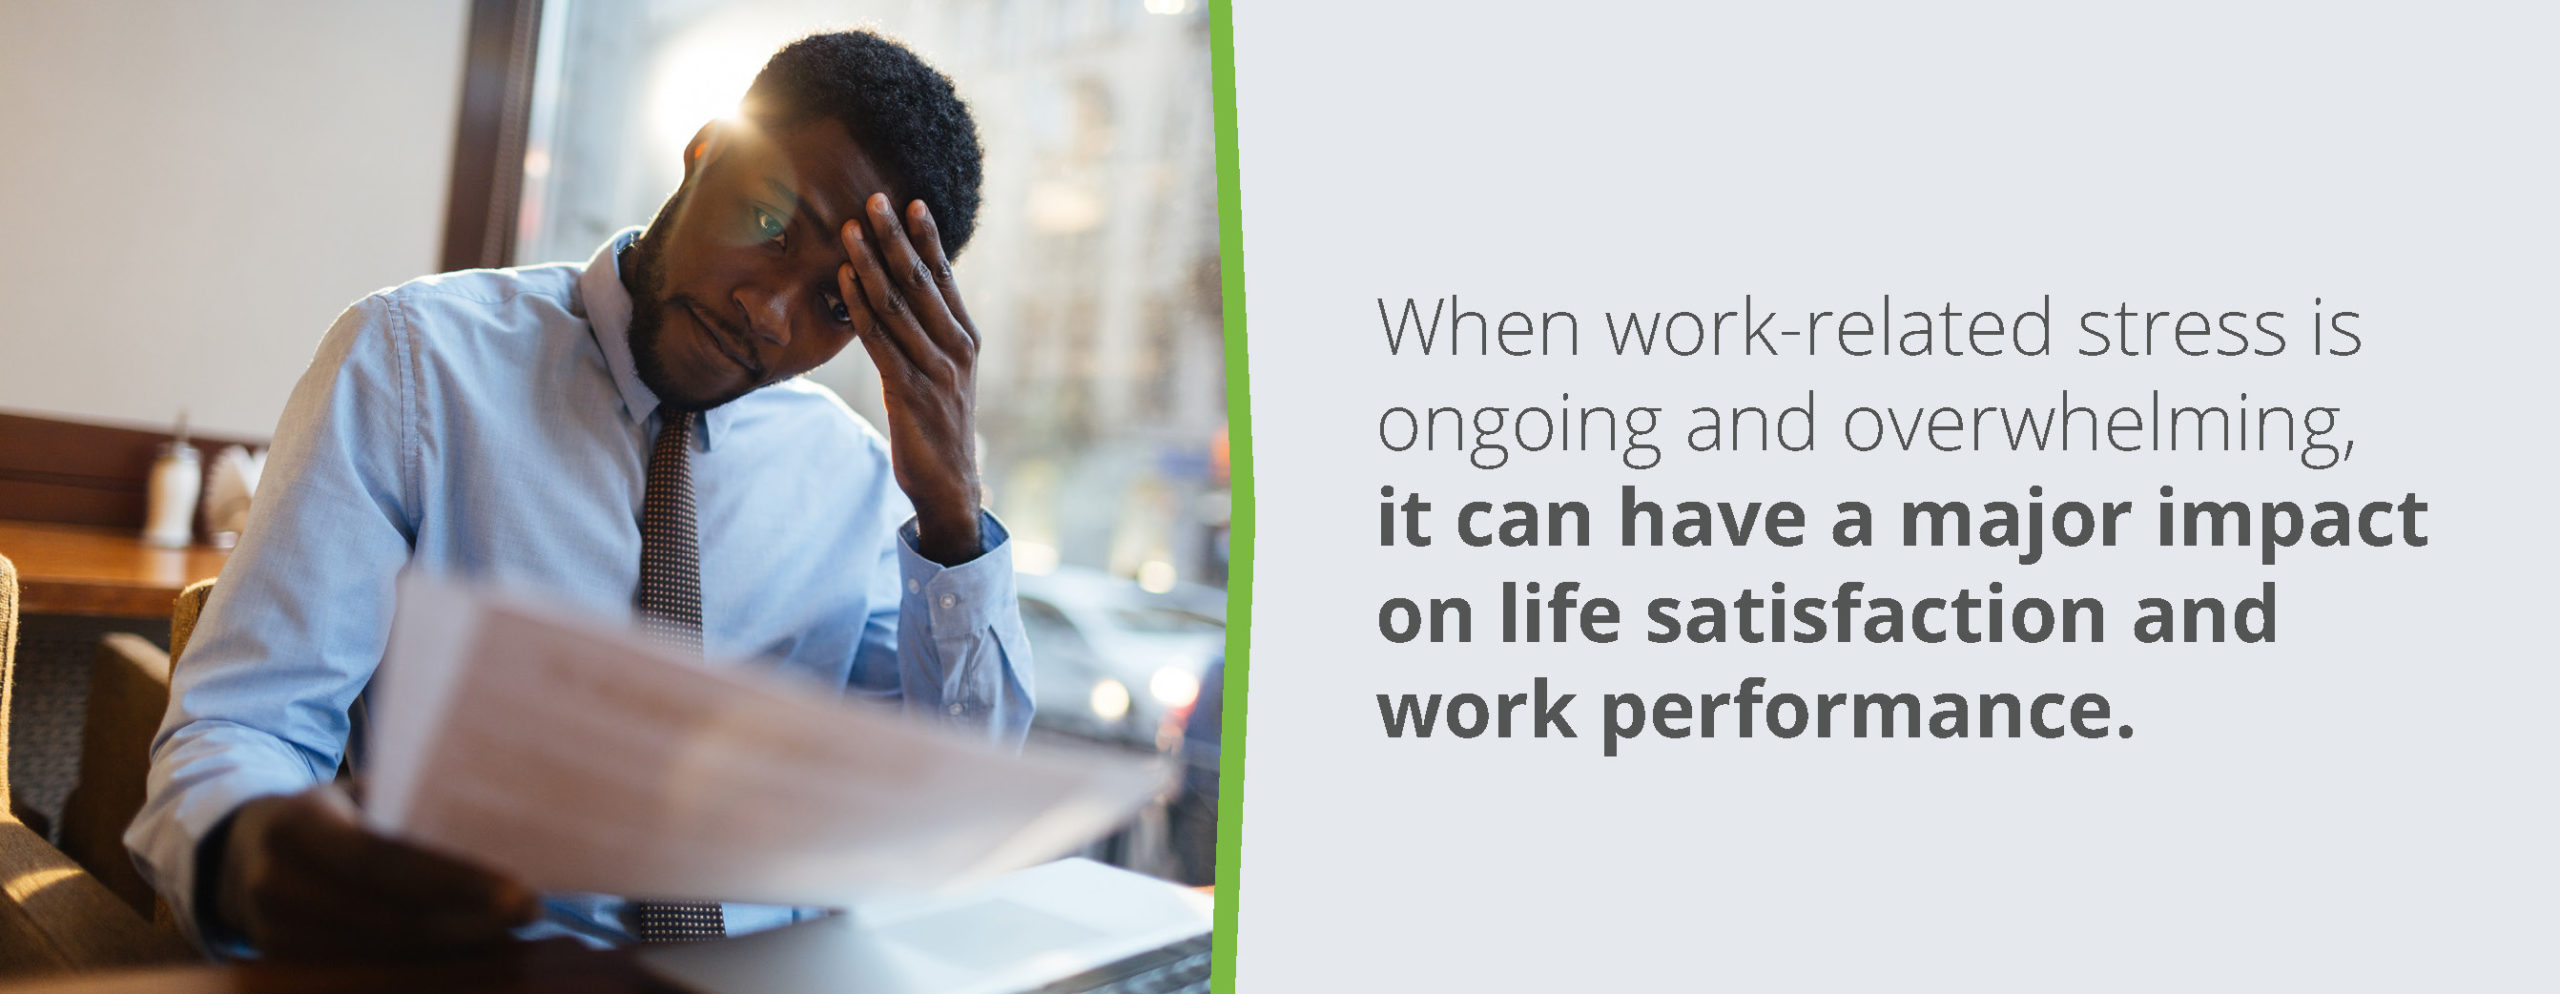 Work-related stress has a major impact on satisfaction and performance